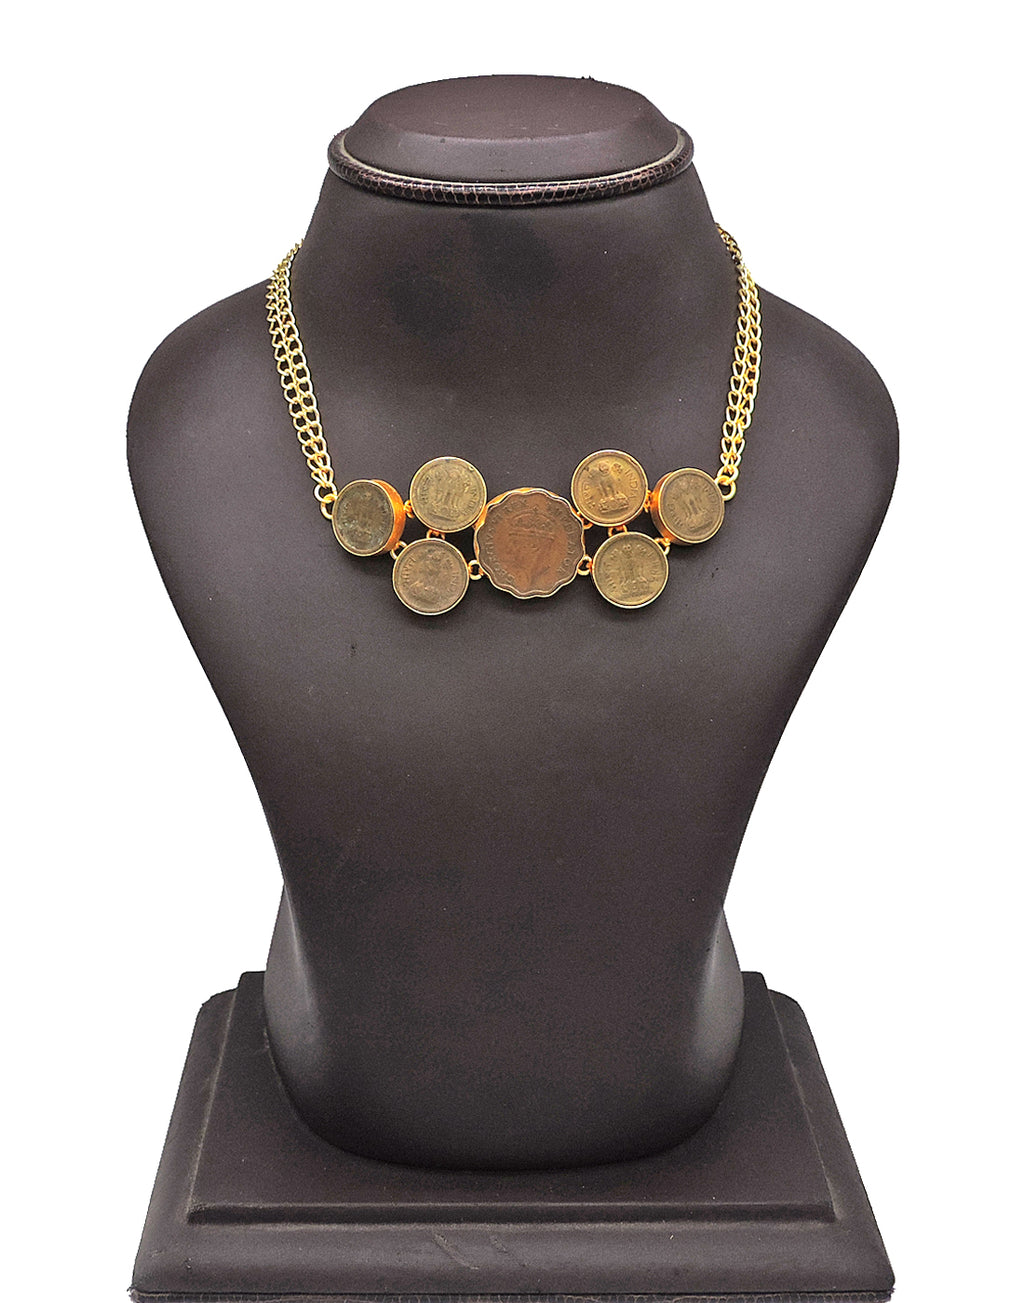 Antique Coin Necklace - Statement Necklaces - Gold-Plated & Hypoallergenic Jewellery - Made in India - Dubai Jewellery - Dori